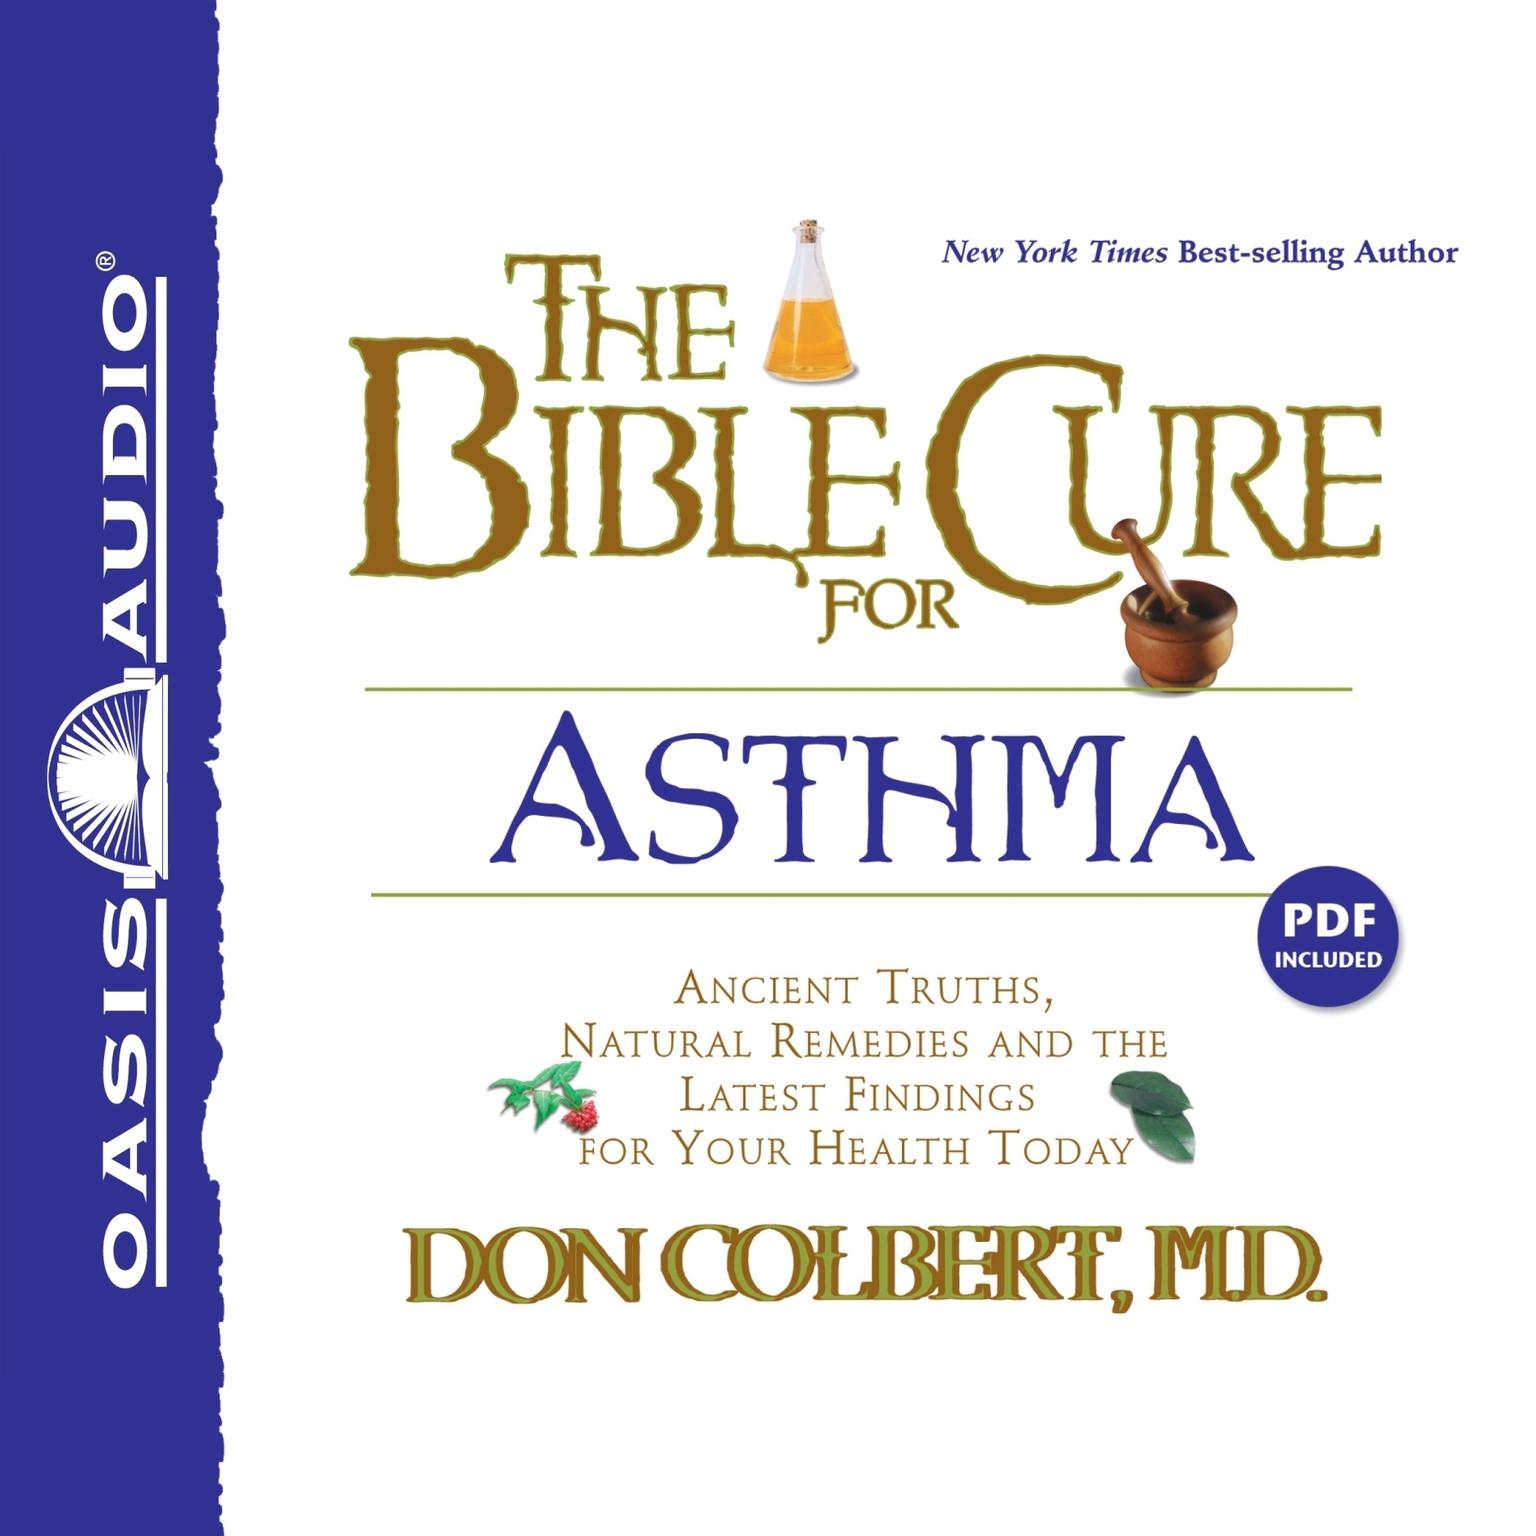 The Bible Cure for Asthma: Ancient Truths, Natural Remedies and the Latest Findings for Your Health Today Audiobook, by Don Colbert